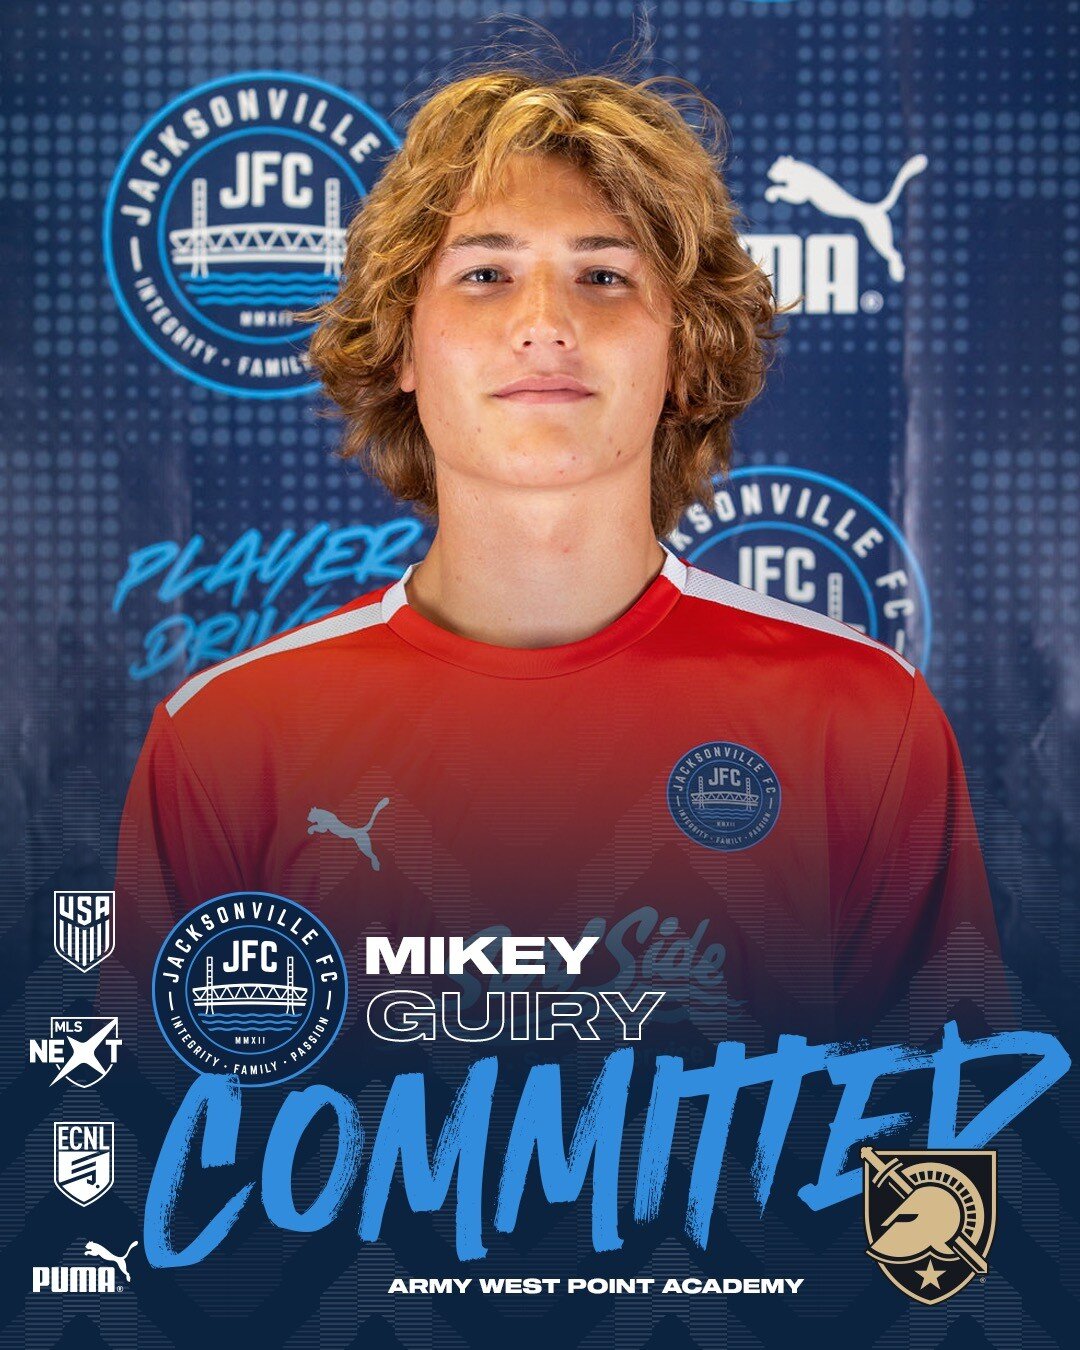 JFC is thrilled to announce that Mikey Guiry has committed to play collegiate soccer at Army/West Point Academy and will be serving his country as a member of the United States Army. This is an incredible achievement and we are incredibly proud of Mi